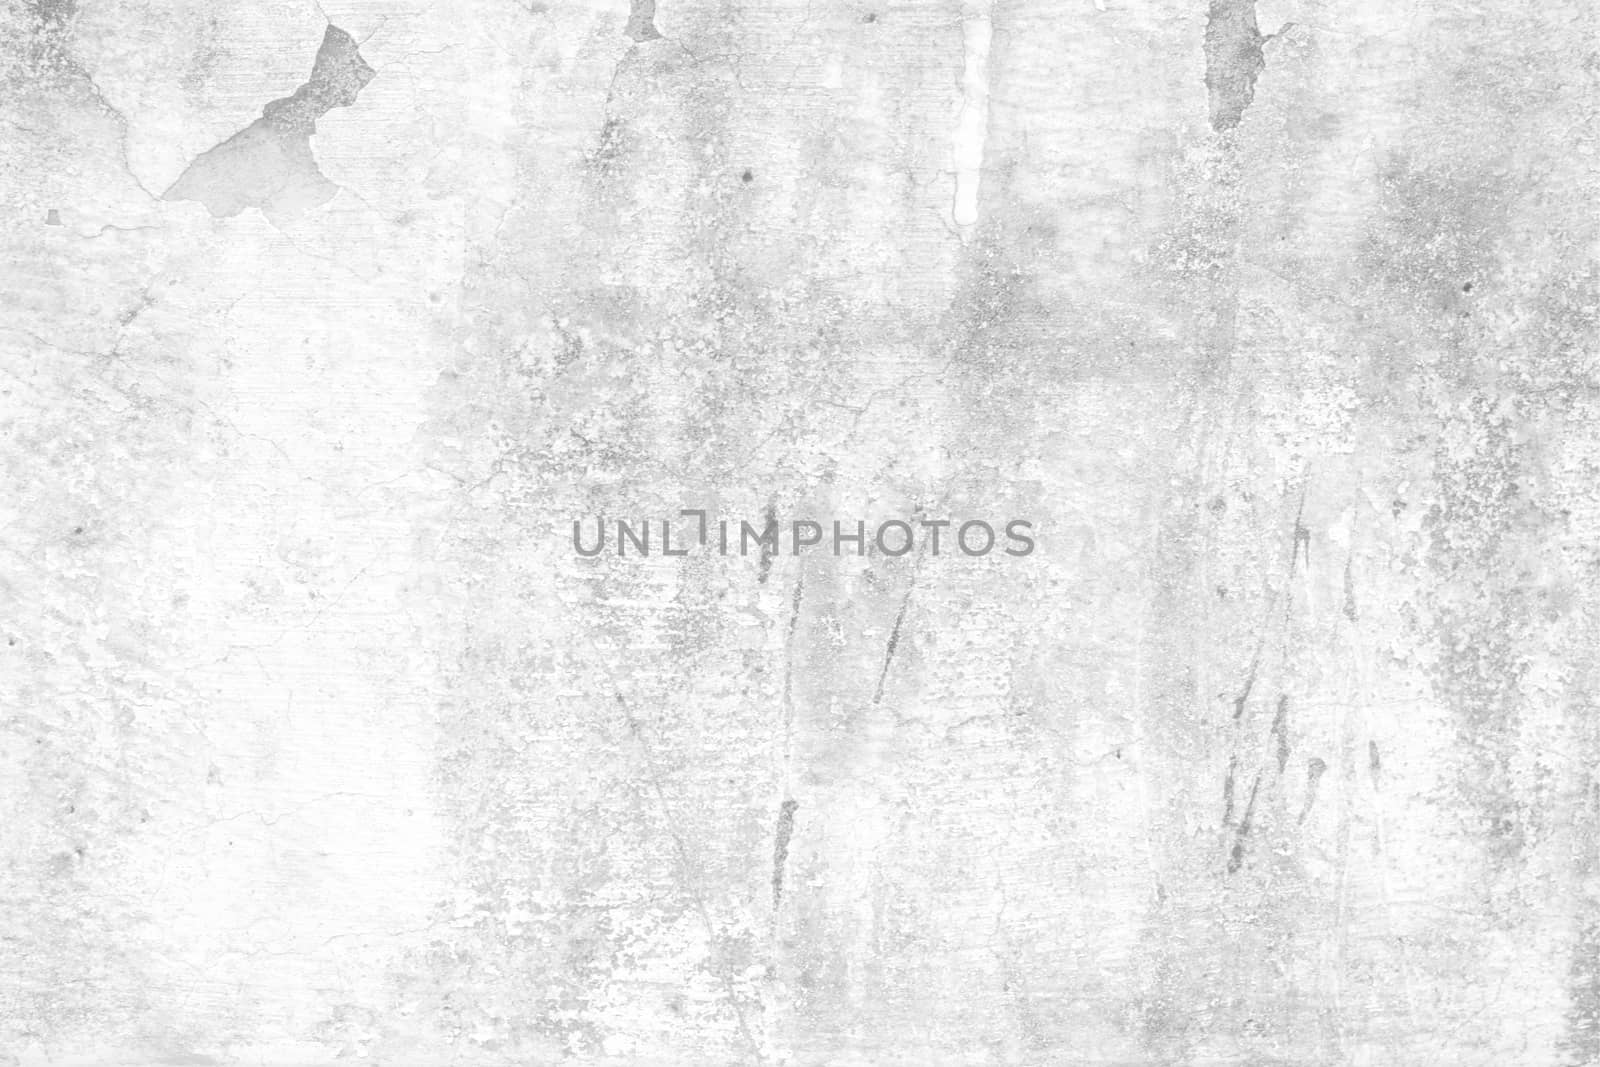 White Grunge Peeling Painted Concrete Wall Texture Background. by mesamong